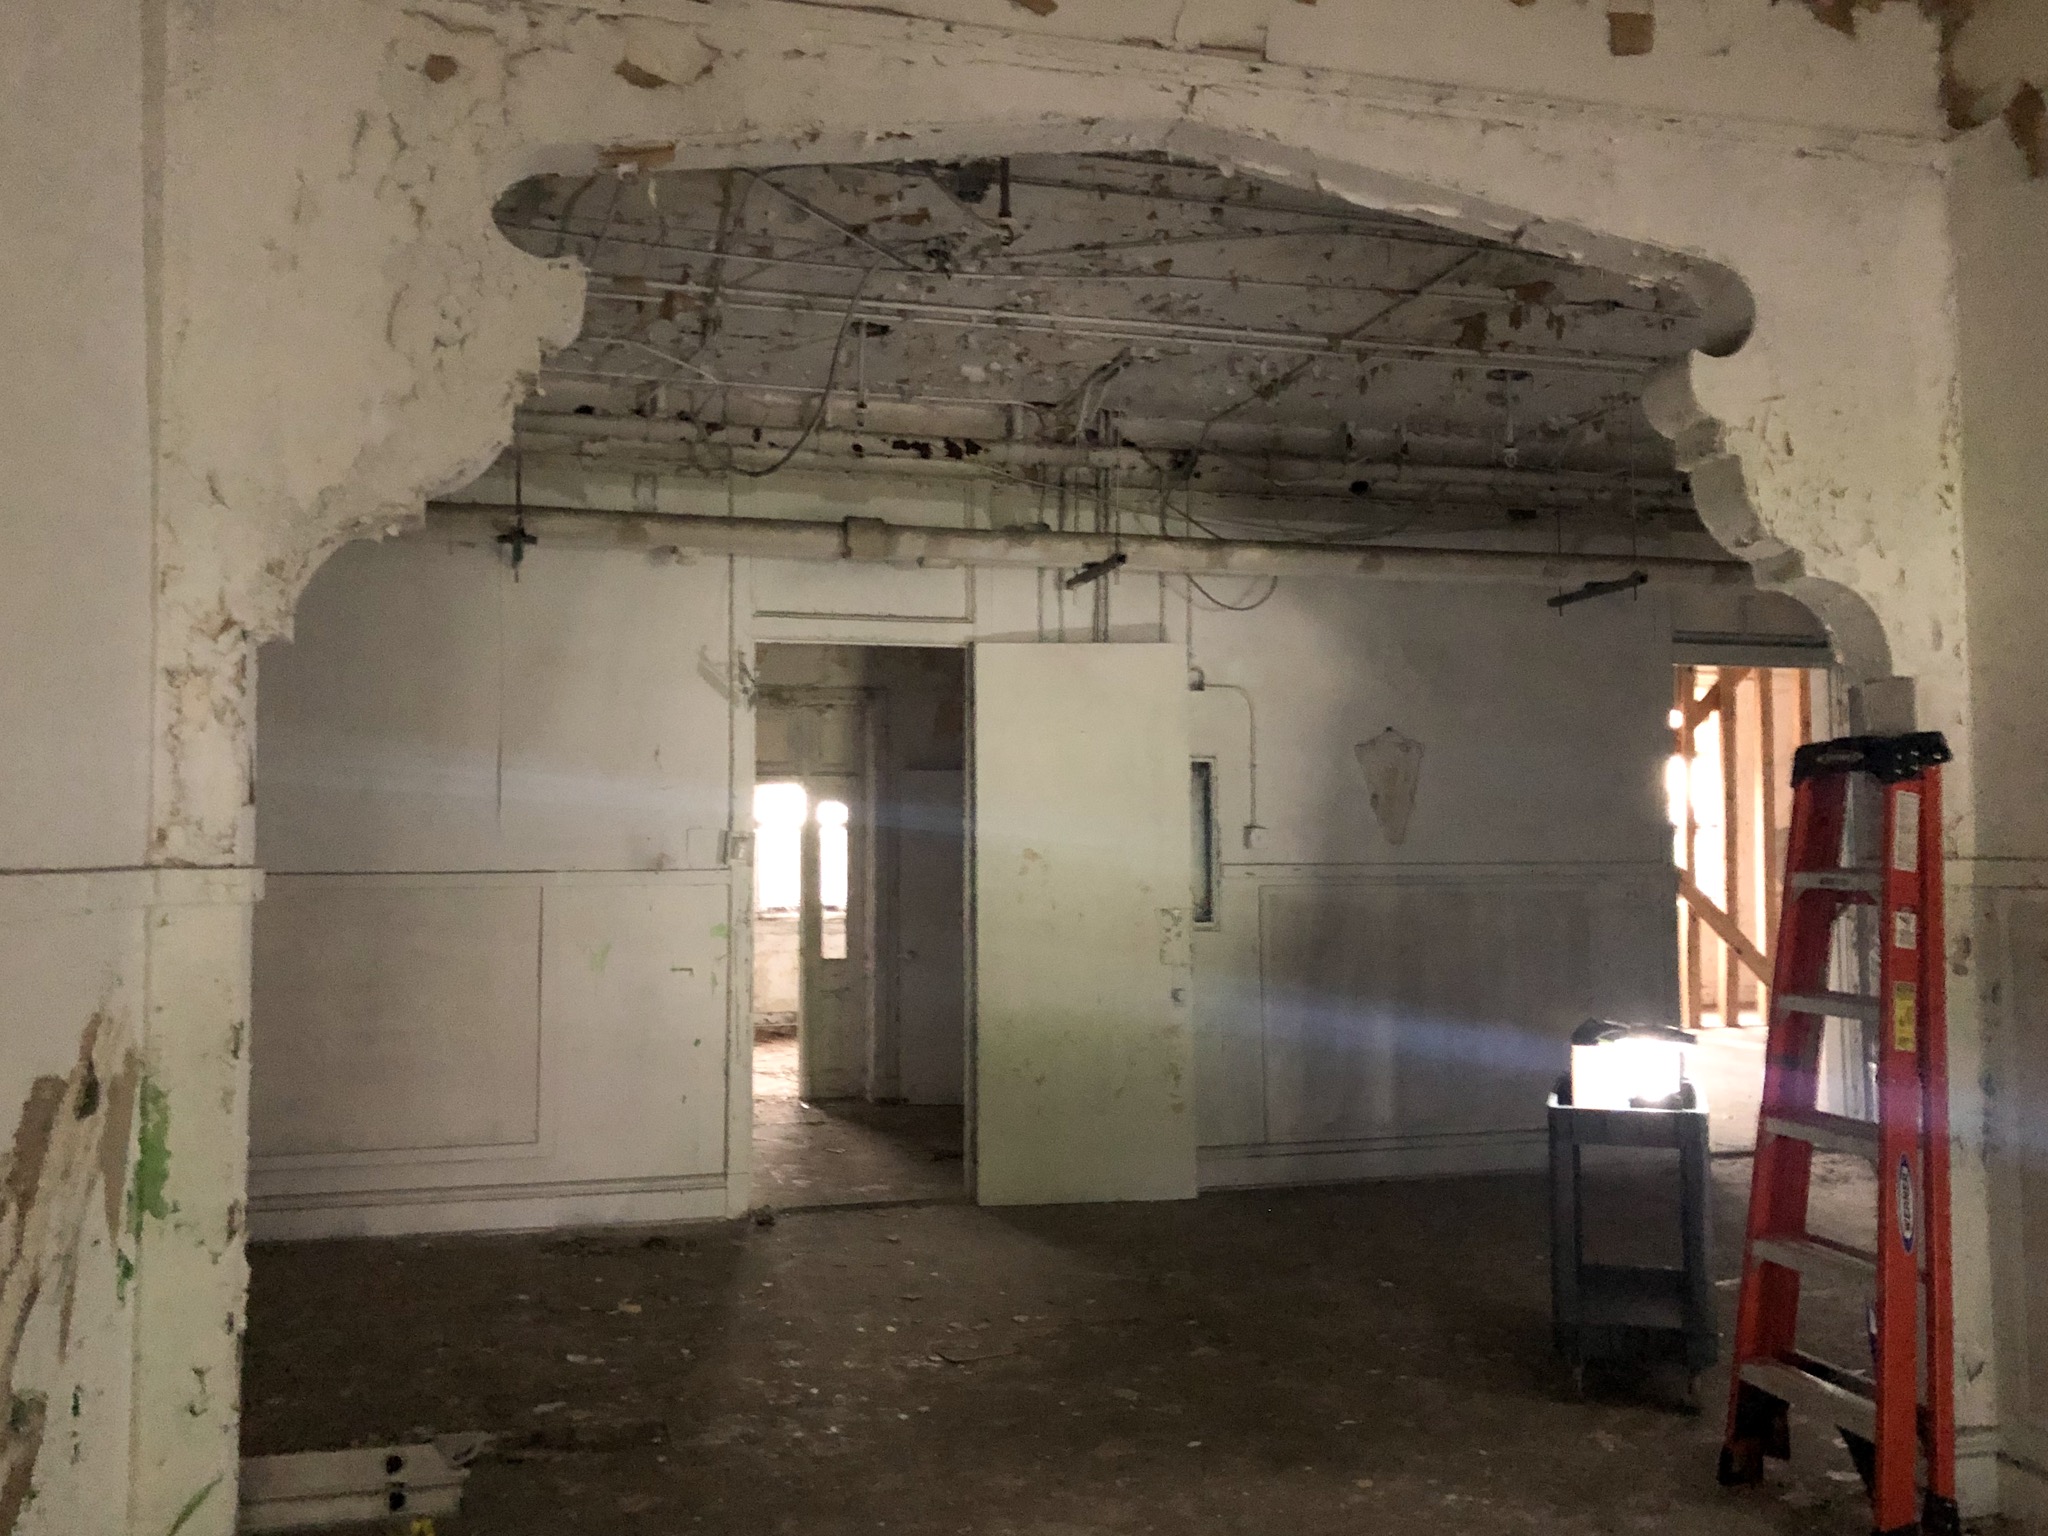 The interior of the Tate, Etienne, and Prevost Center during the Phase II environmental assessment. The photo depits a room with a ladder leaning against the wall, pipes visible in the ceiling and a wall removed in the background. A decorative archway frames the entrance.